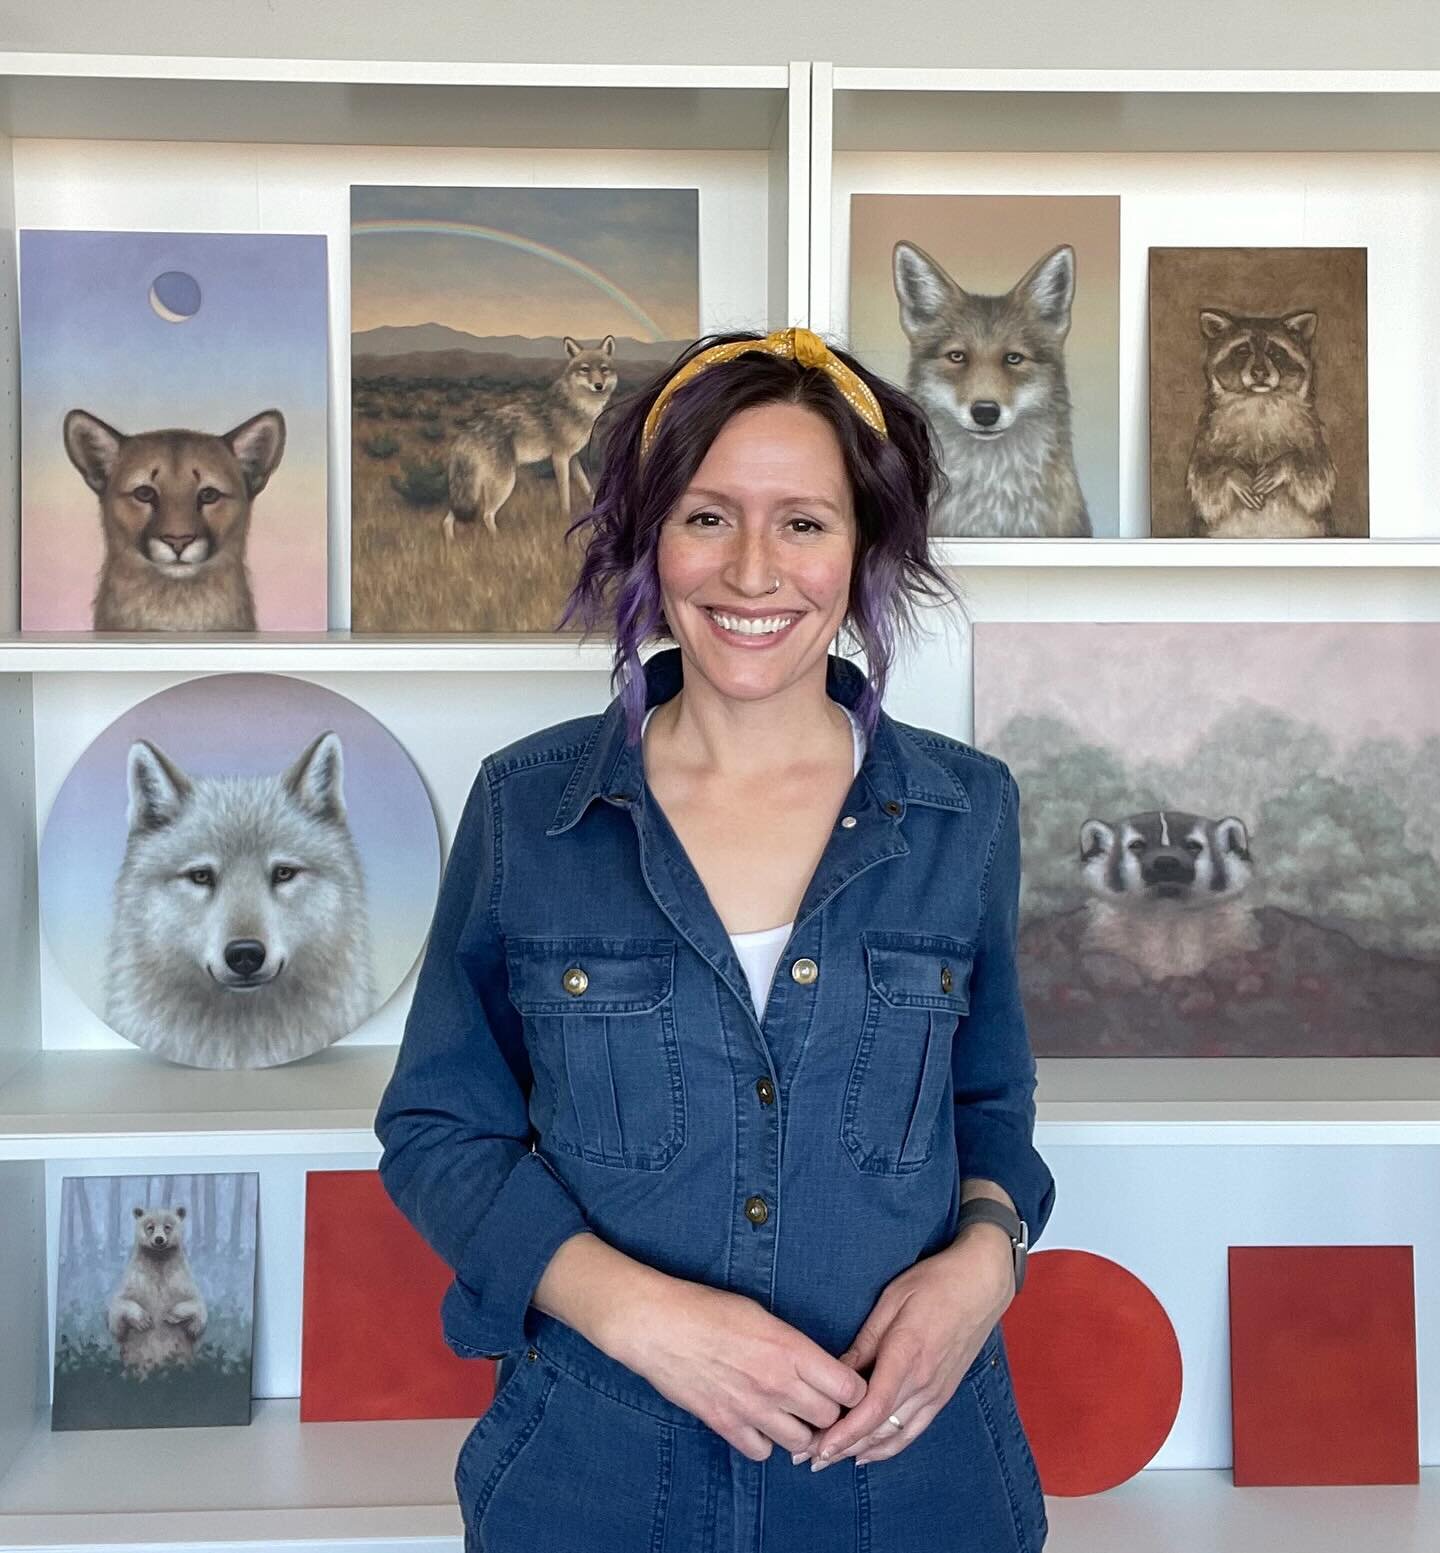 @sarahbecktel brings a seriousness to her subject matter&mdash;animals and the natural world&mdash;that compliments and, even more, complicates lighter, less-troubling portrayals. A major goal for Sarah through her work is to reorient audience expect